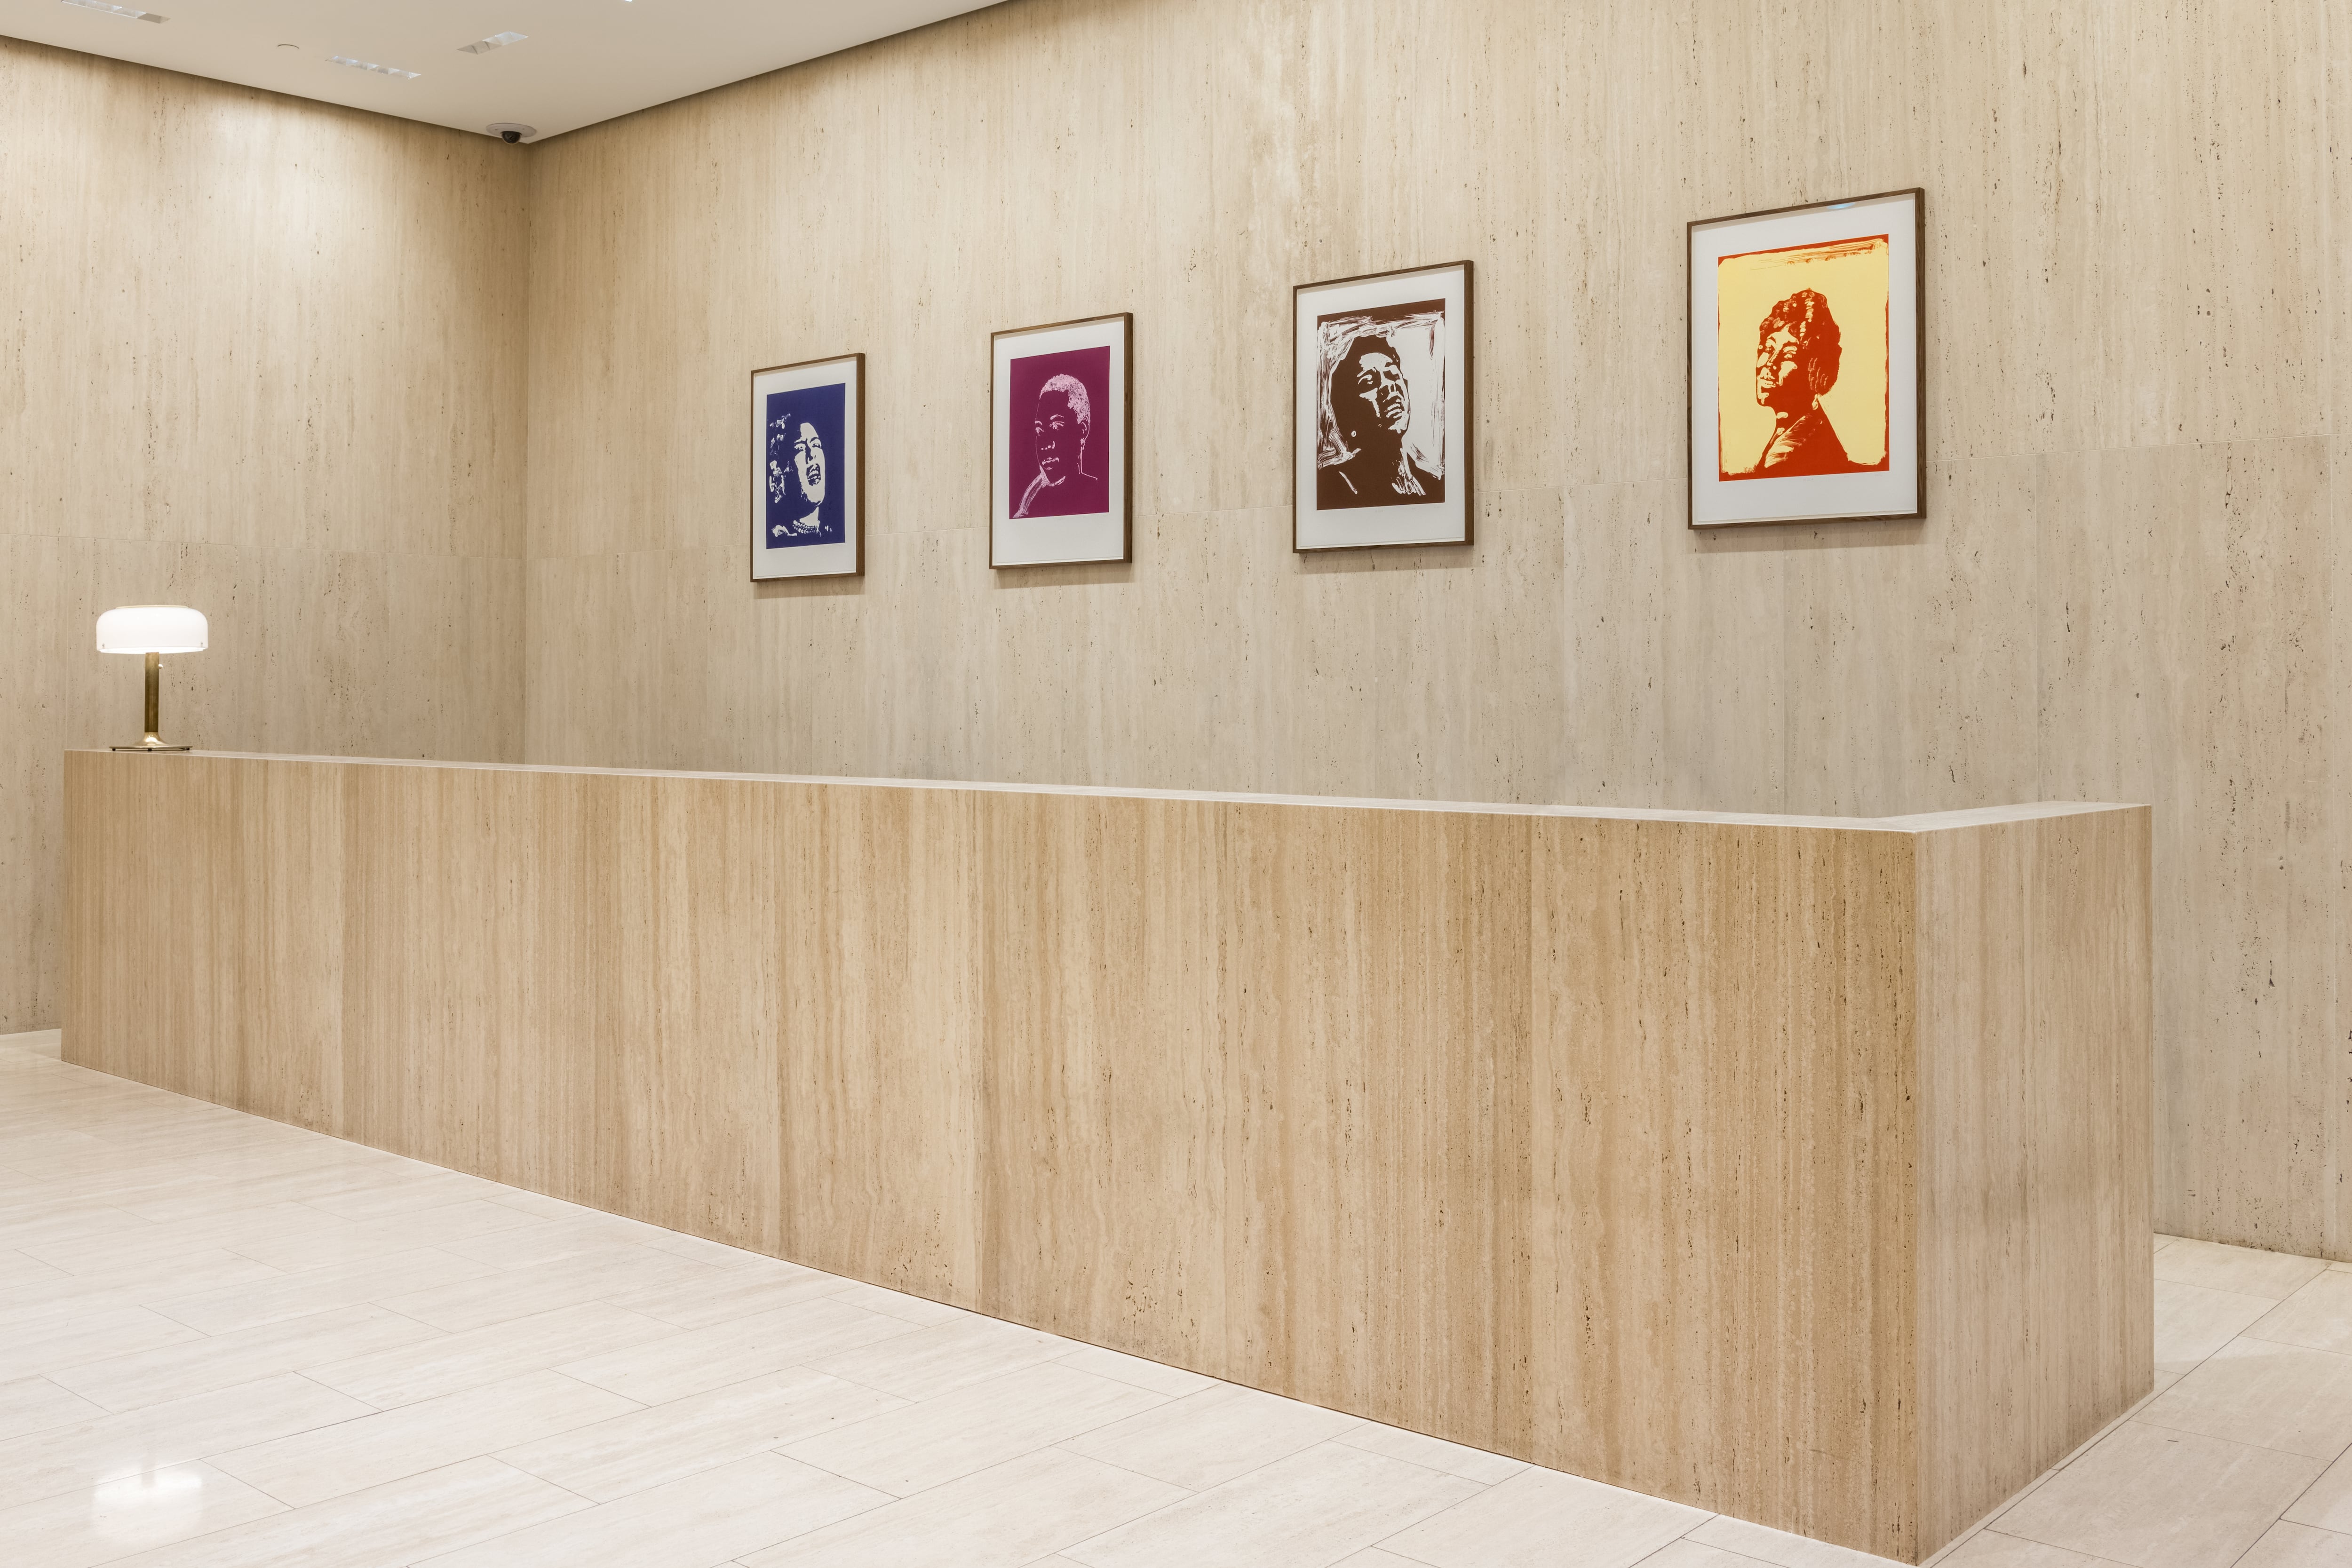 four pieces of art by Thomas Schütte hung along the wall behind the reception desk